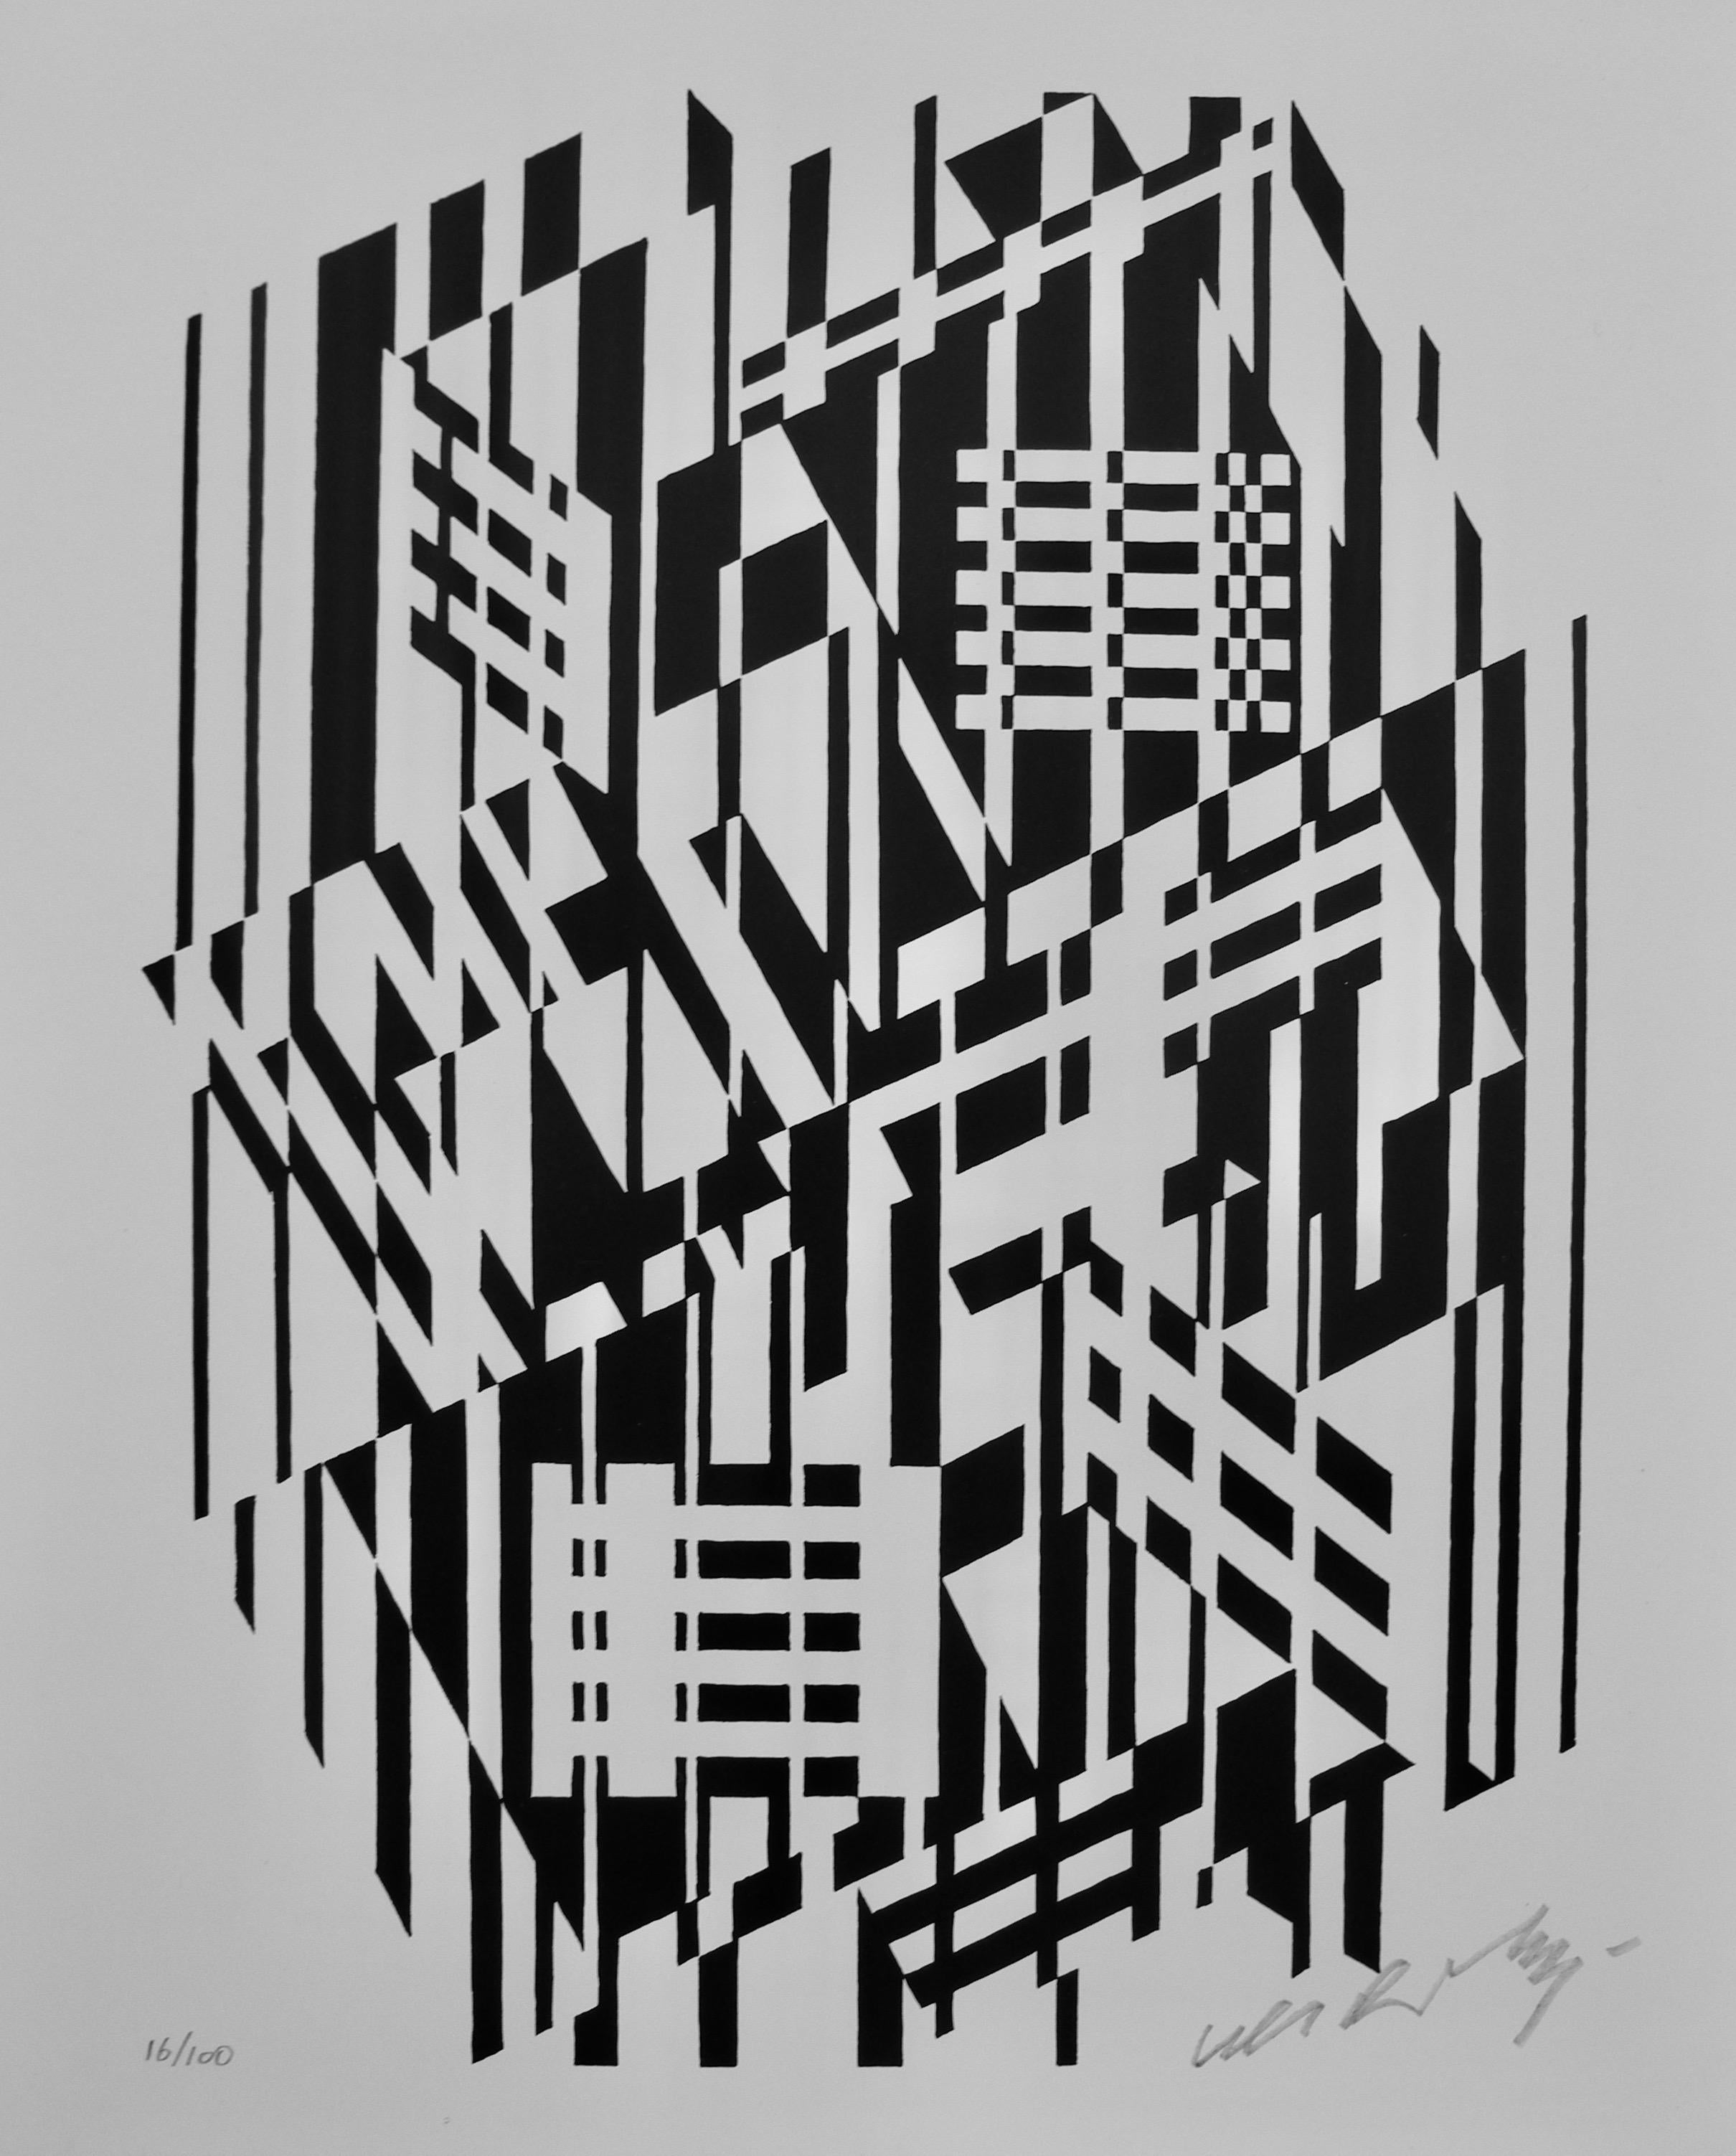 Paper Pop Art Victor Vasarely Black and White Optical Prints For Sale